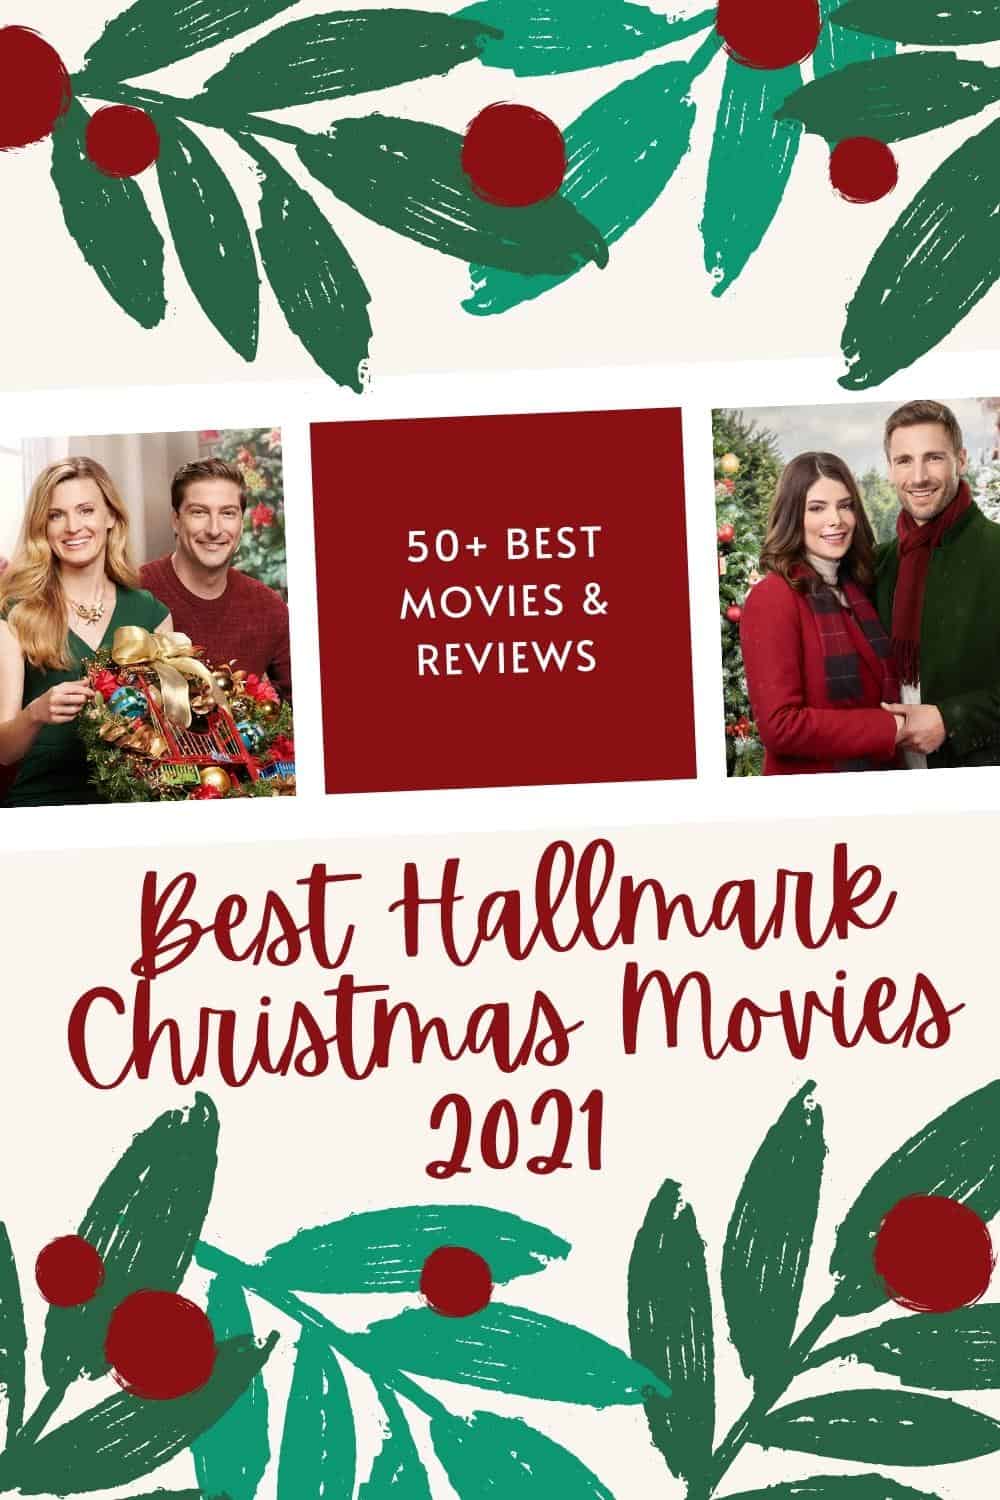 Greatest Hallmark Christmas Movies To Watch in 2022